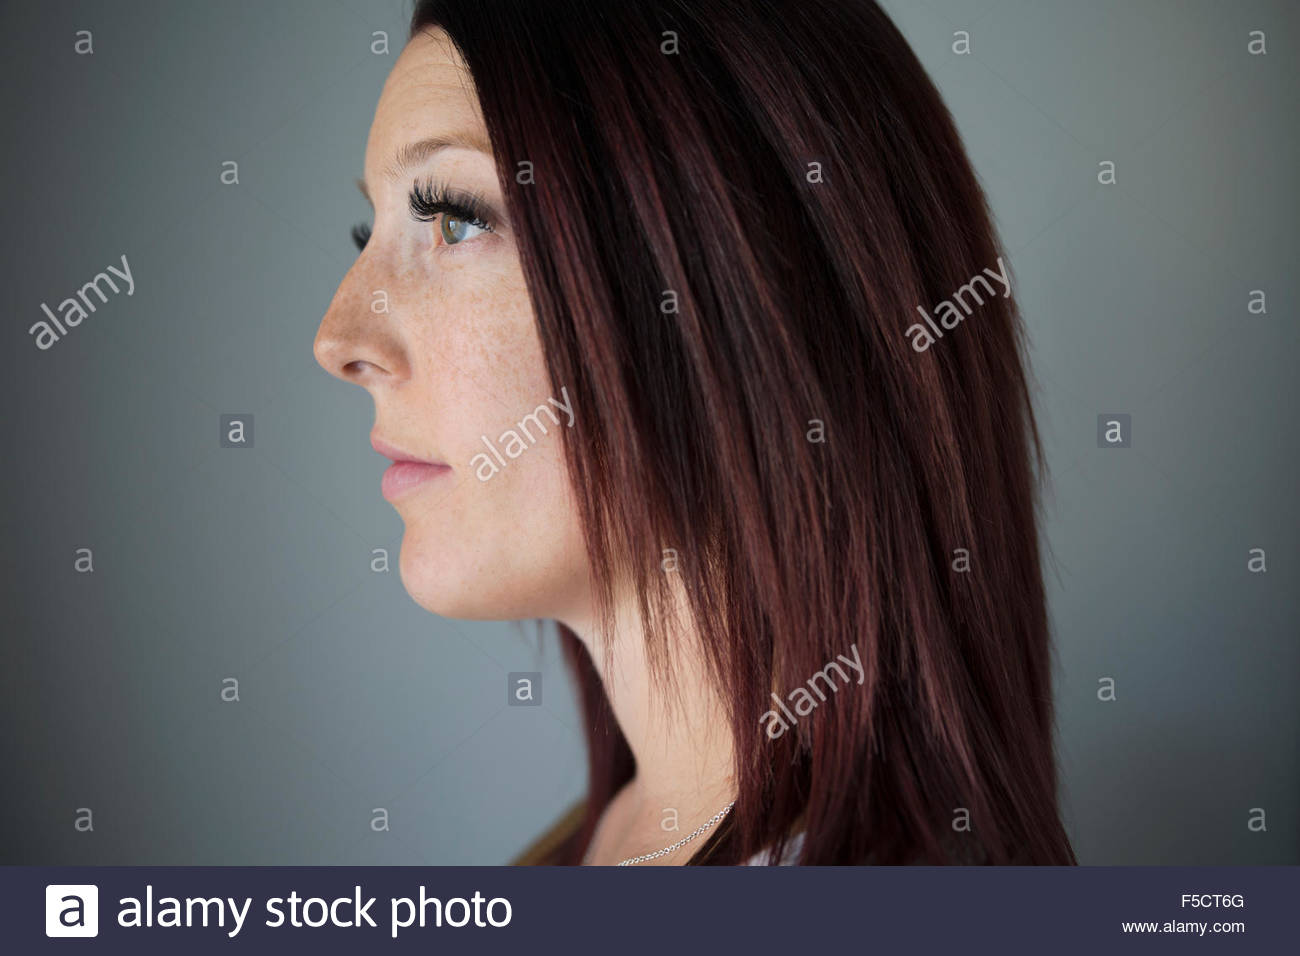 Close up profile pensive woman with red hair Stock Photo